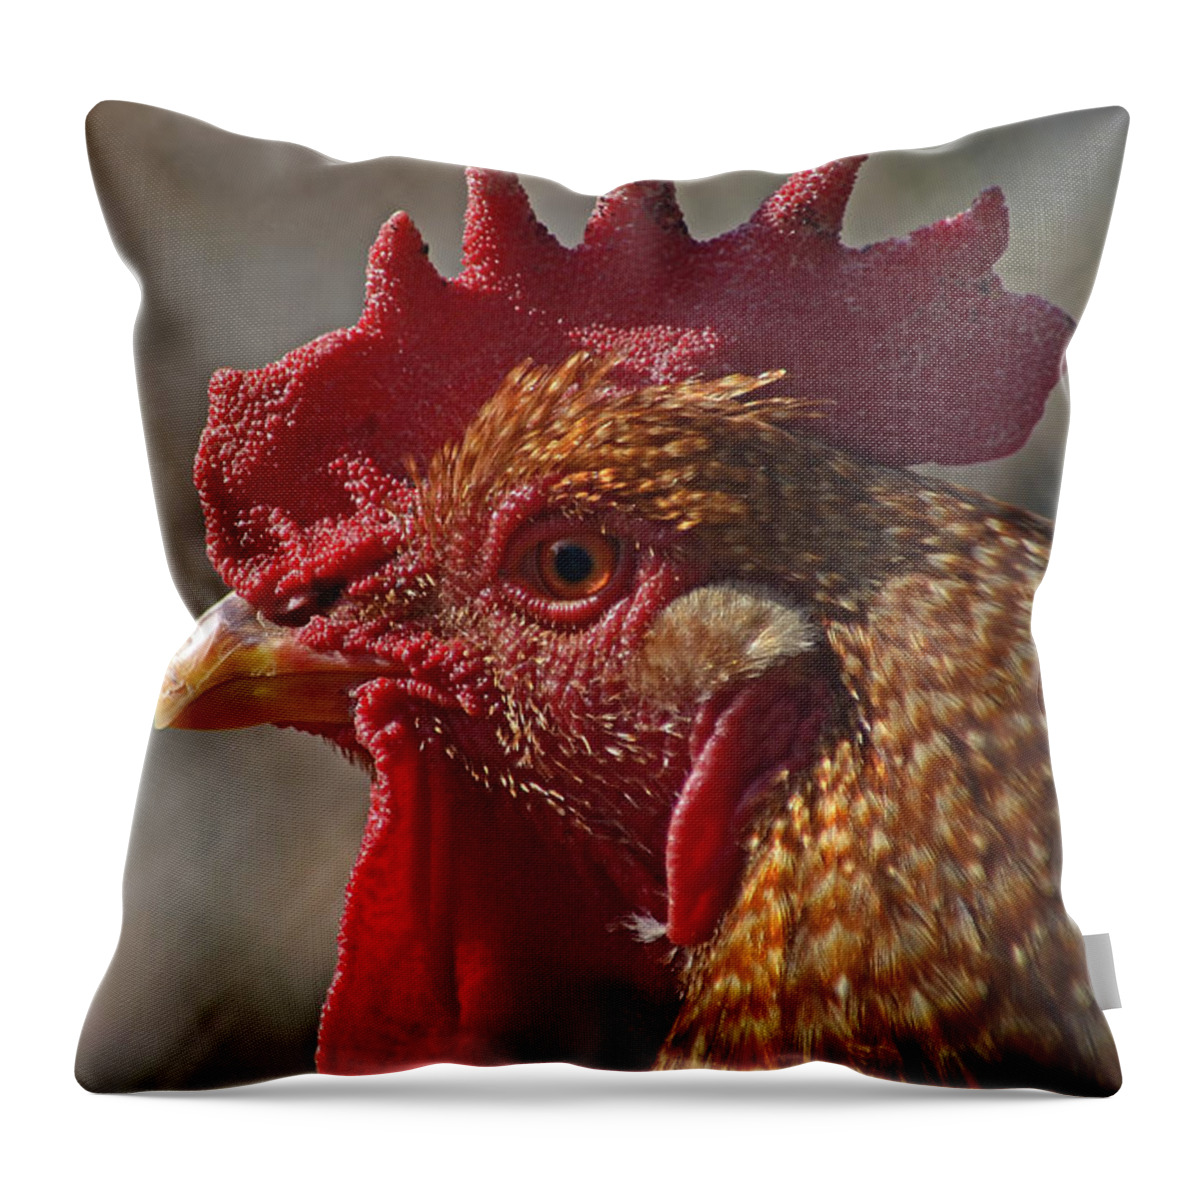 Landscape Throw Pillow featuring the photograph Urban Rooster by Lisa Phillips